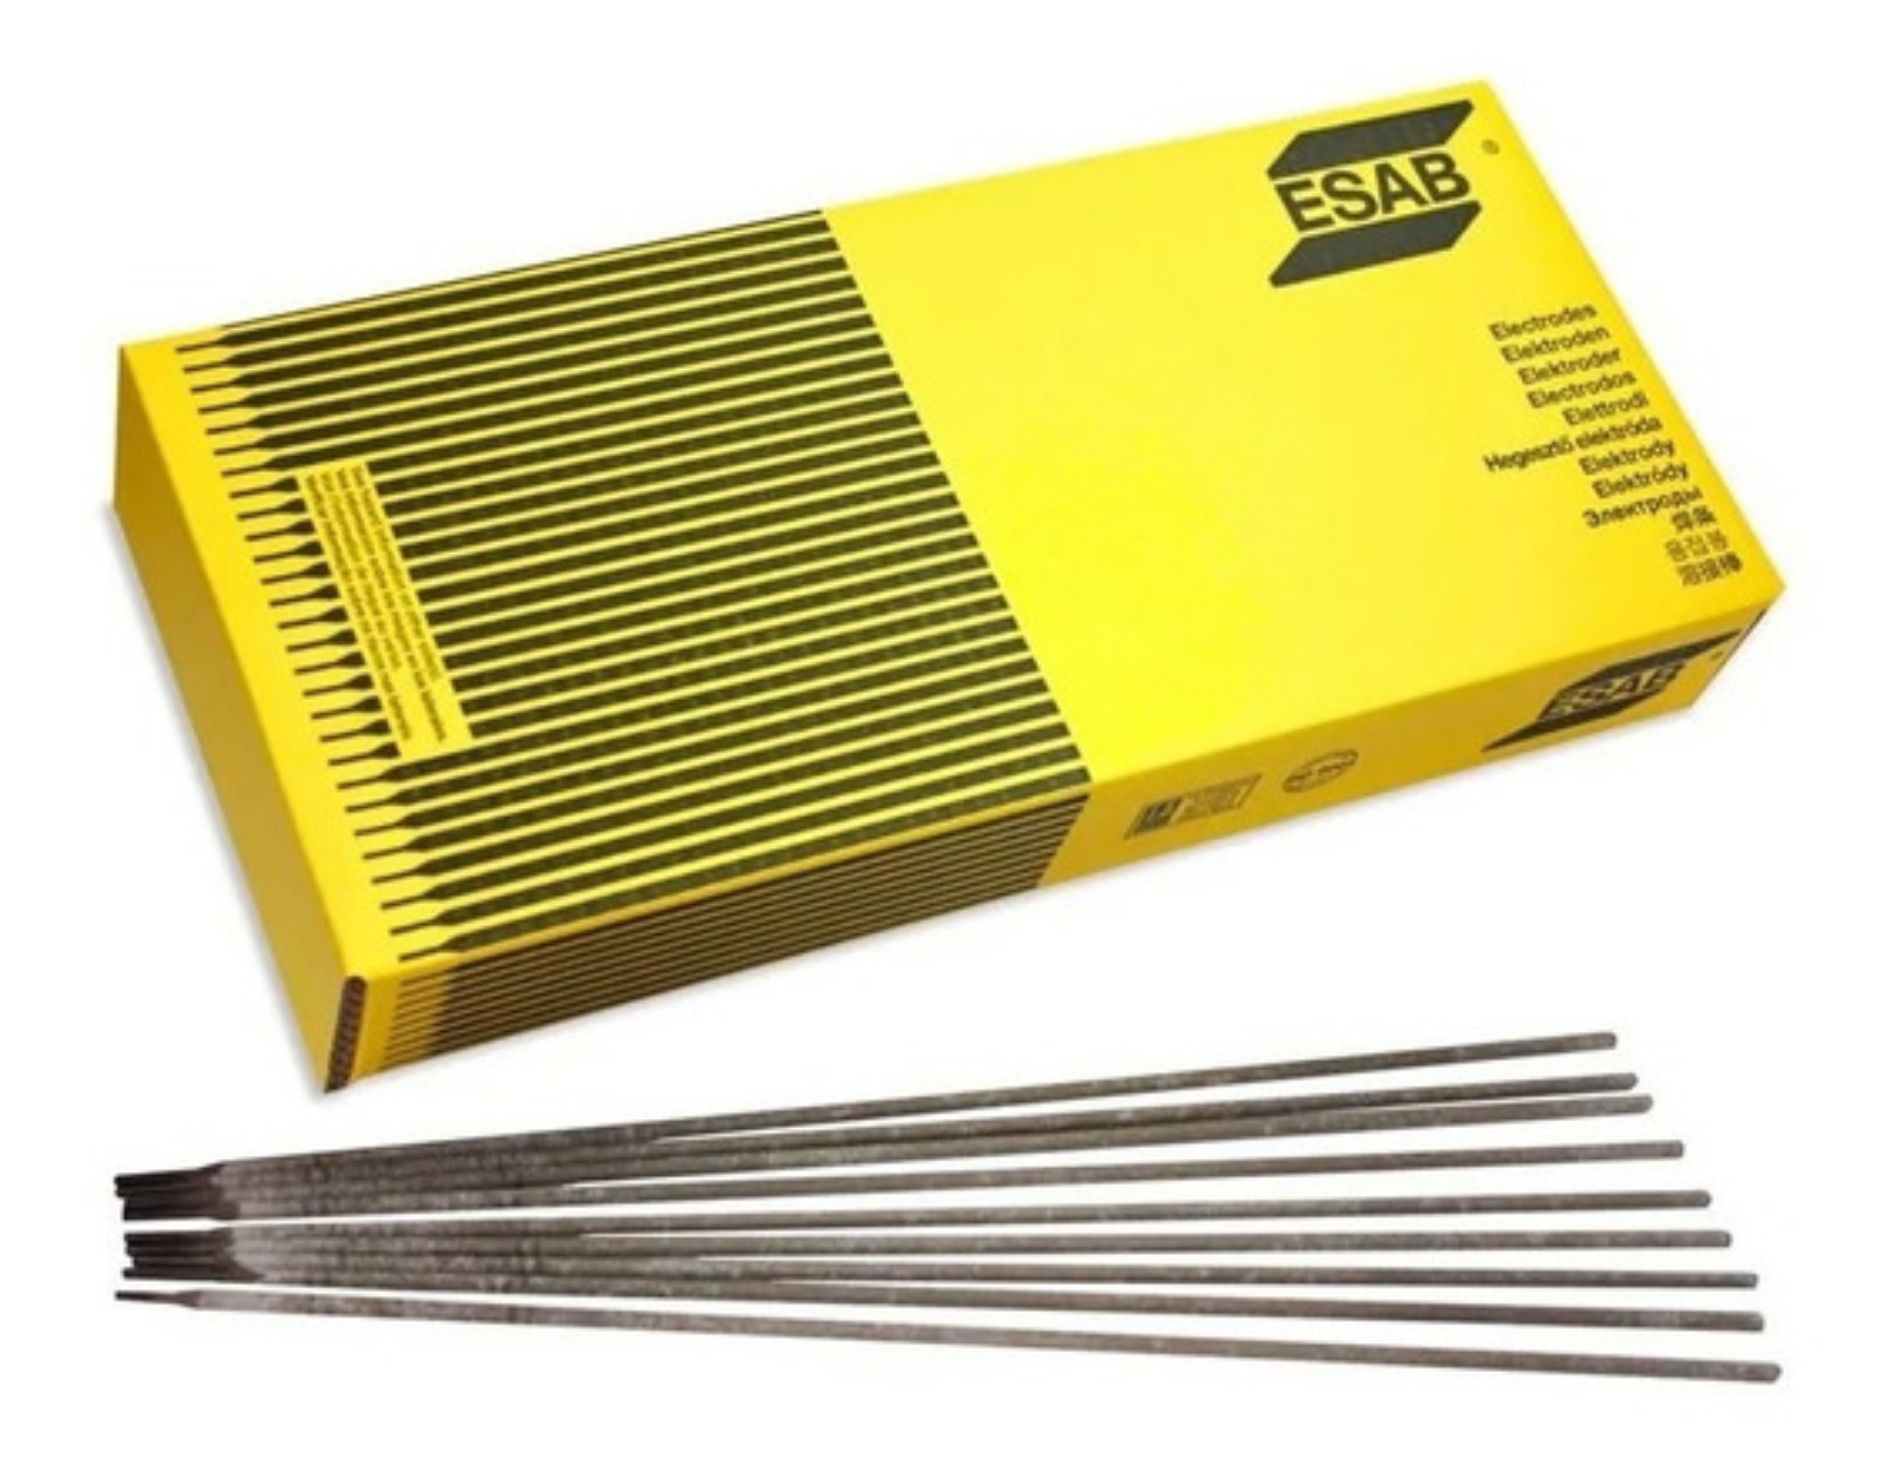 Picture of Esab E316L Electrodes OK63.30 - 1.7kg Pack (5.0 x 350mm)